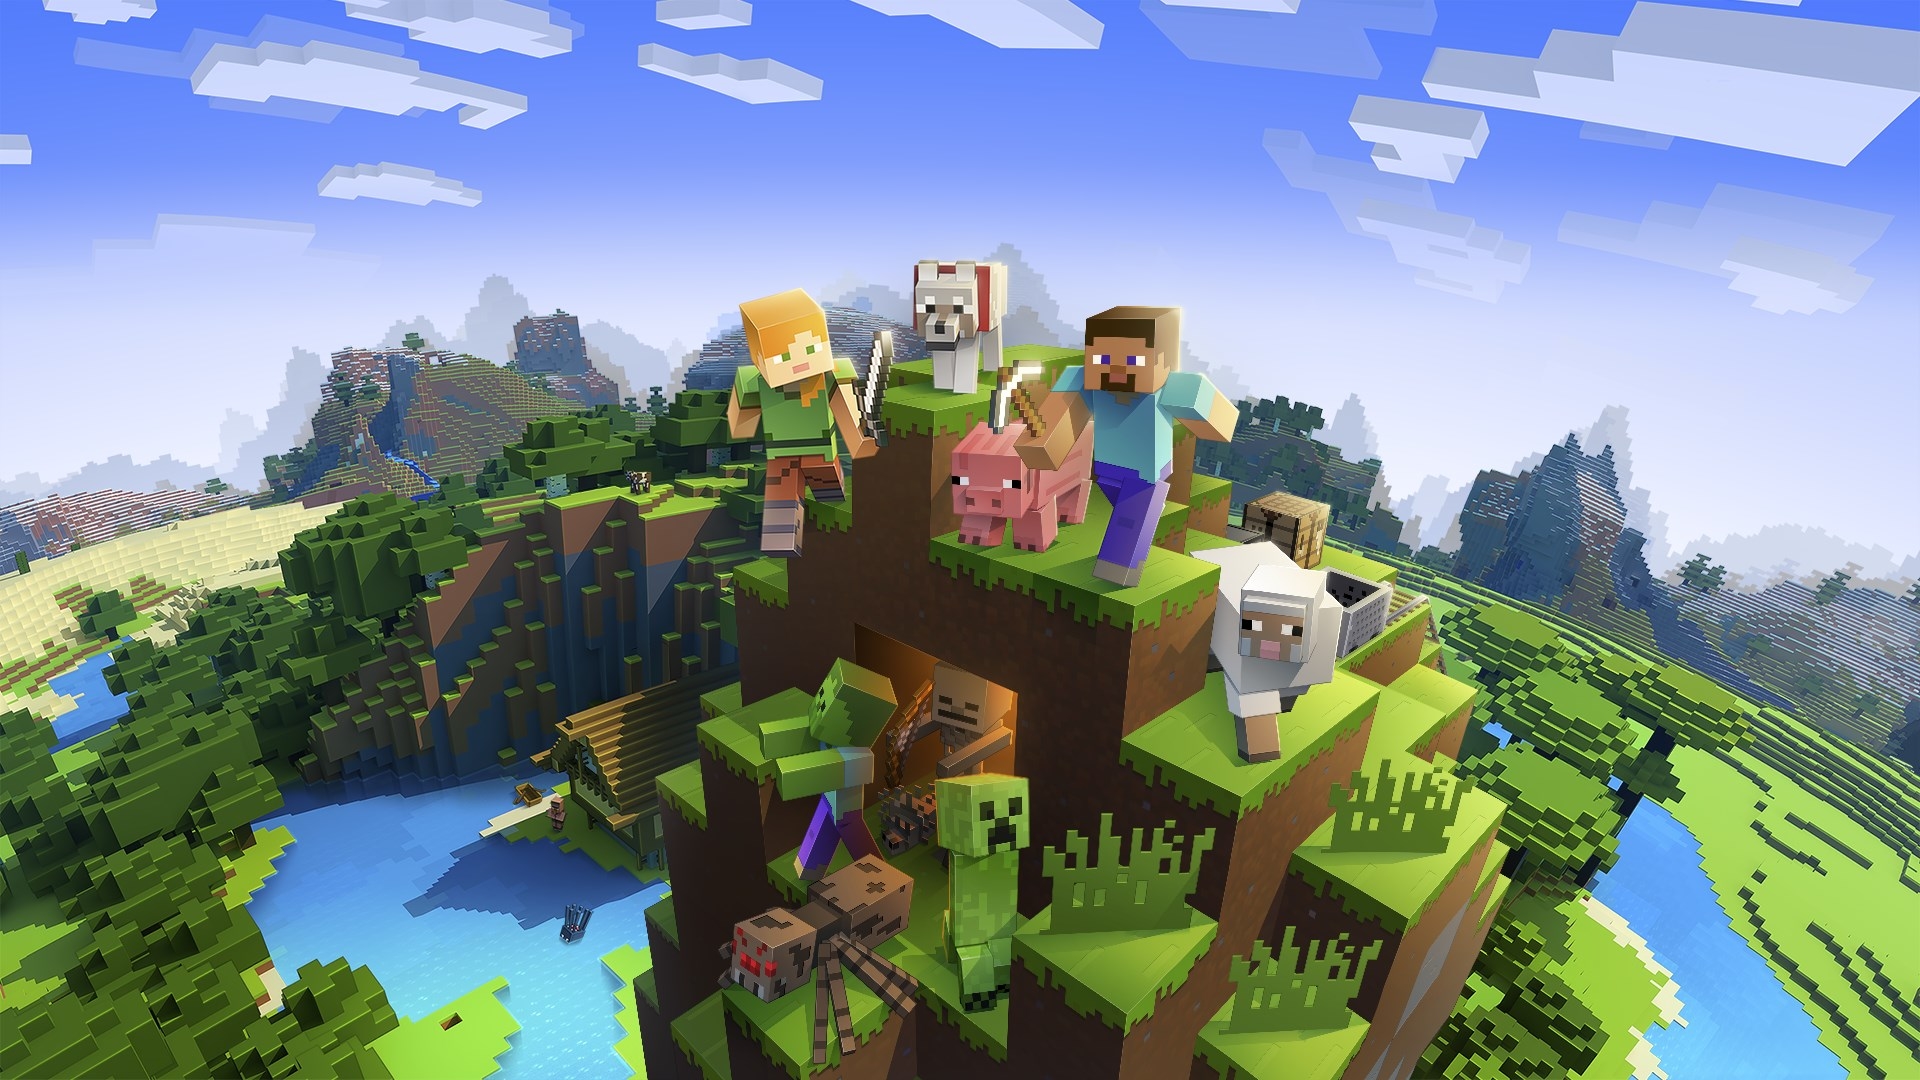 Minecraft 2 release date speculation, news, and mods | PCGamesN